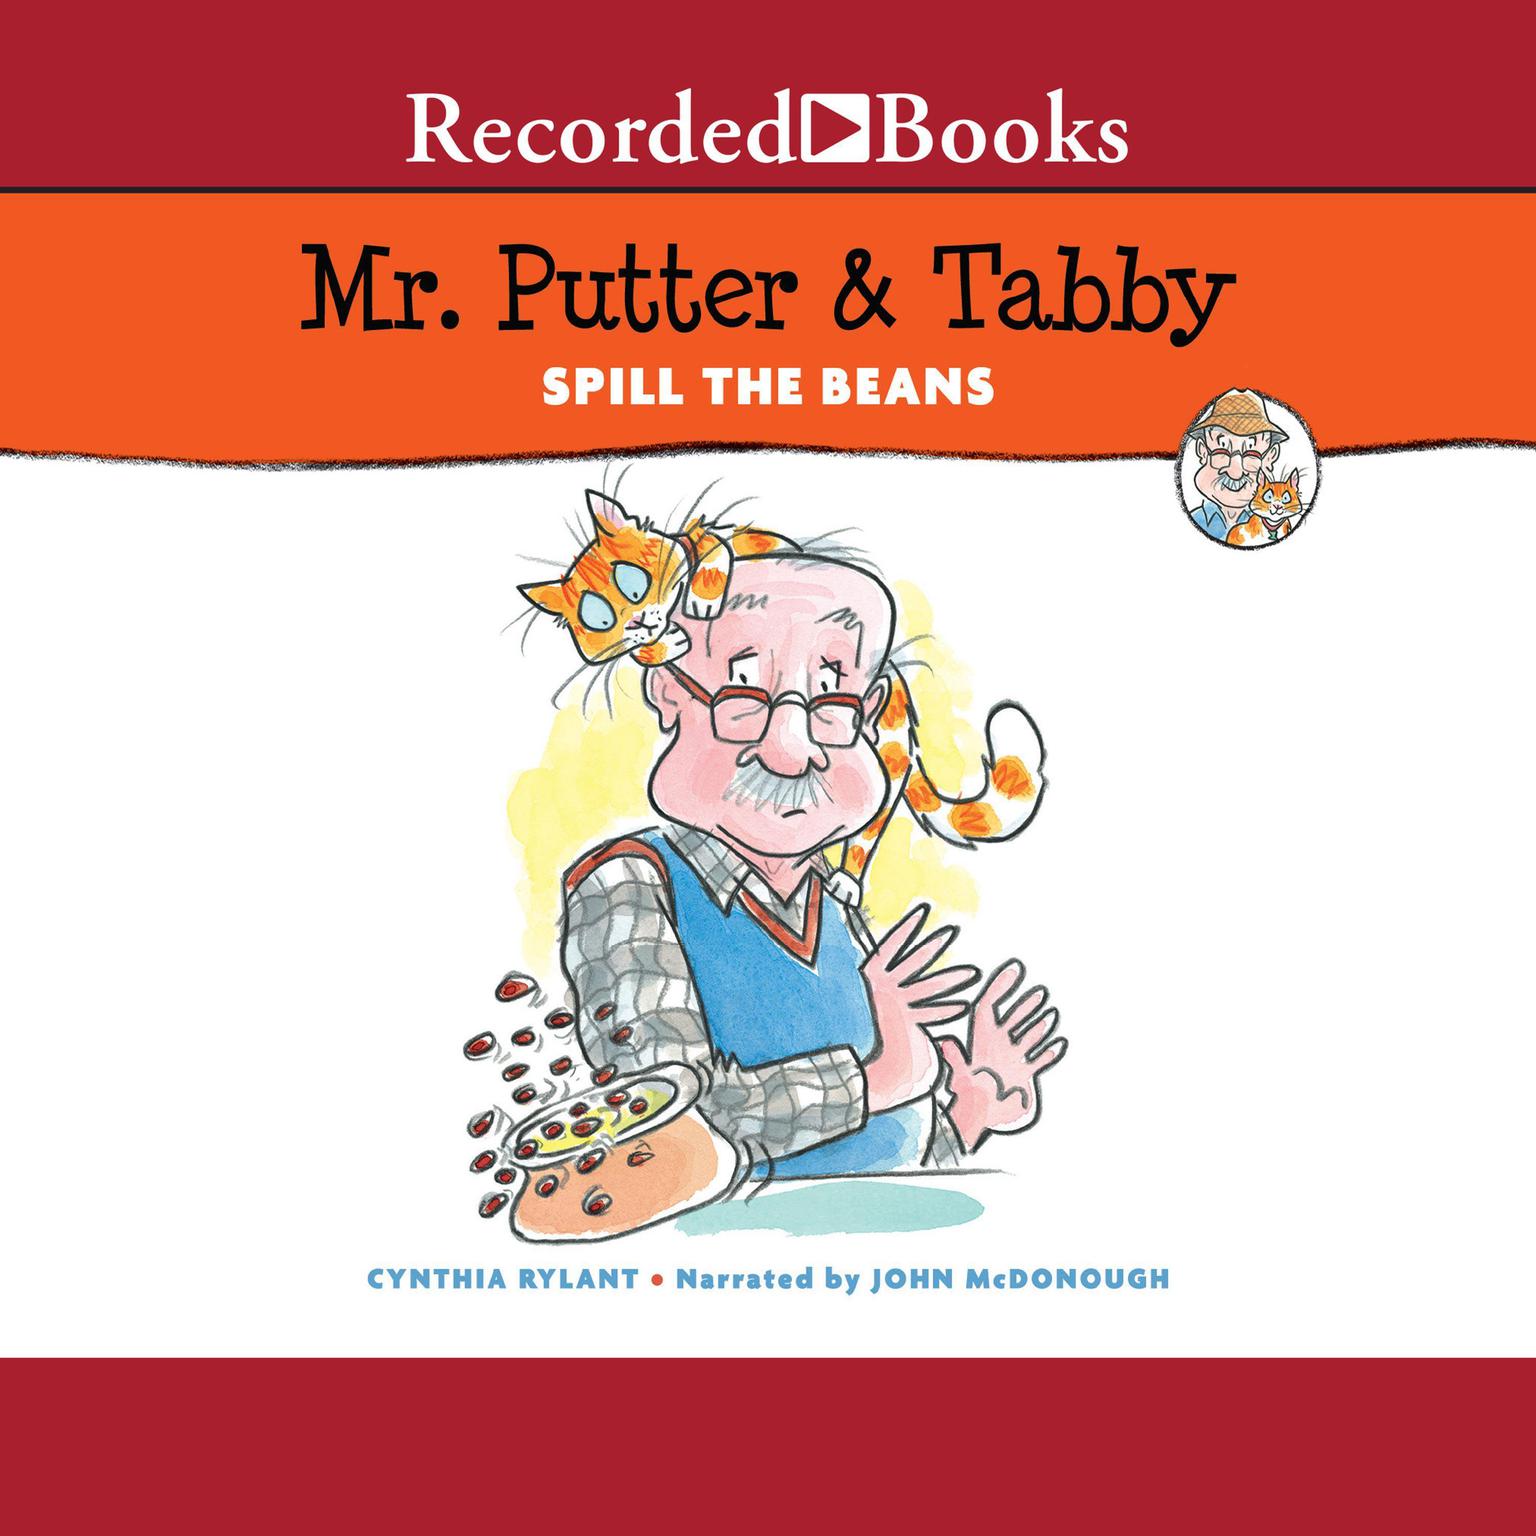 Mr. Putter & Tabby Spill the Beans Audiobook, by Cynthia Rylant